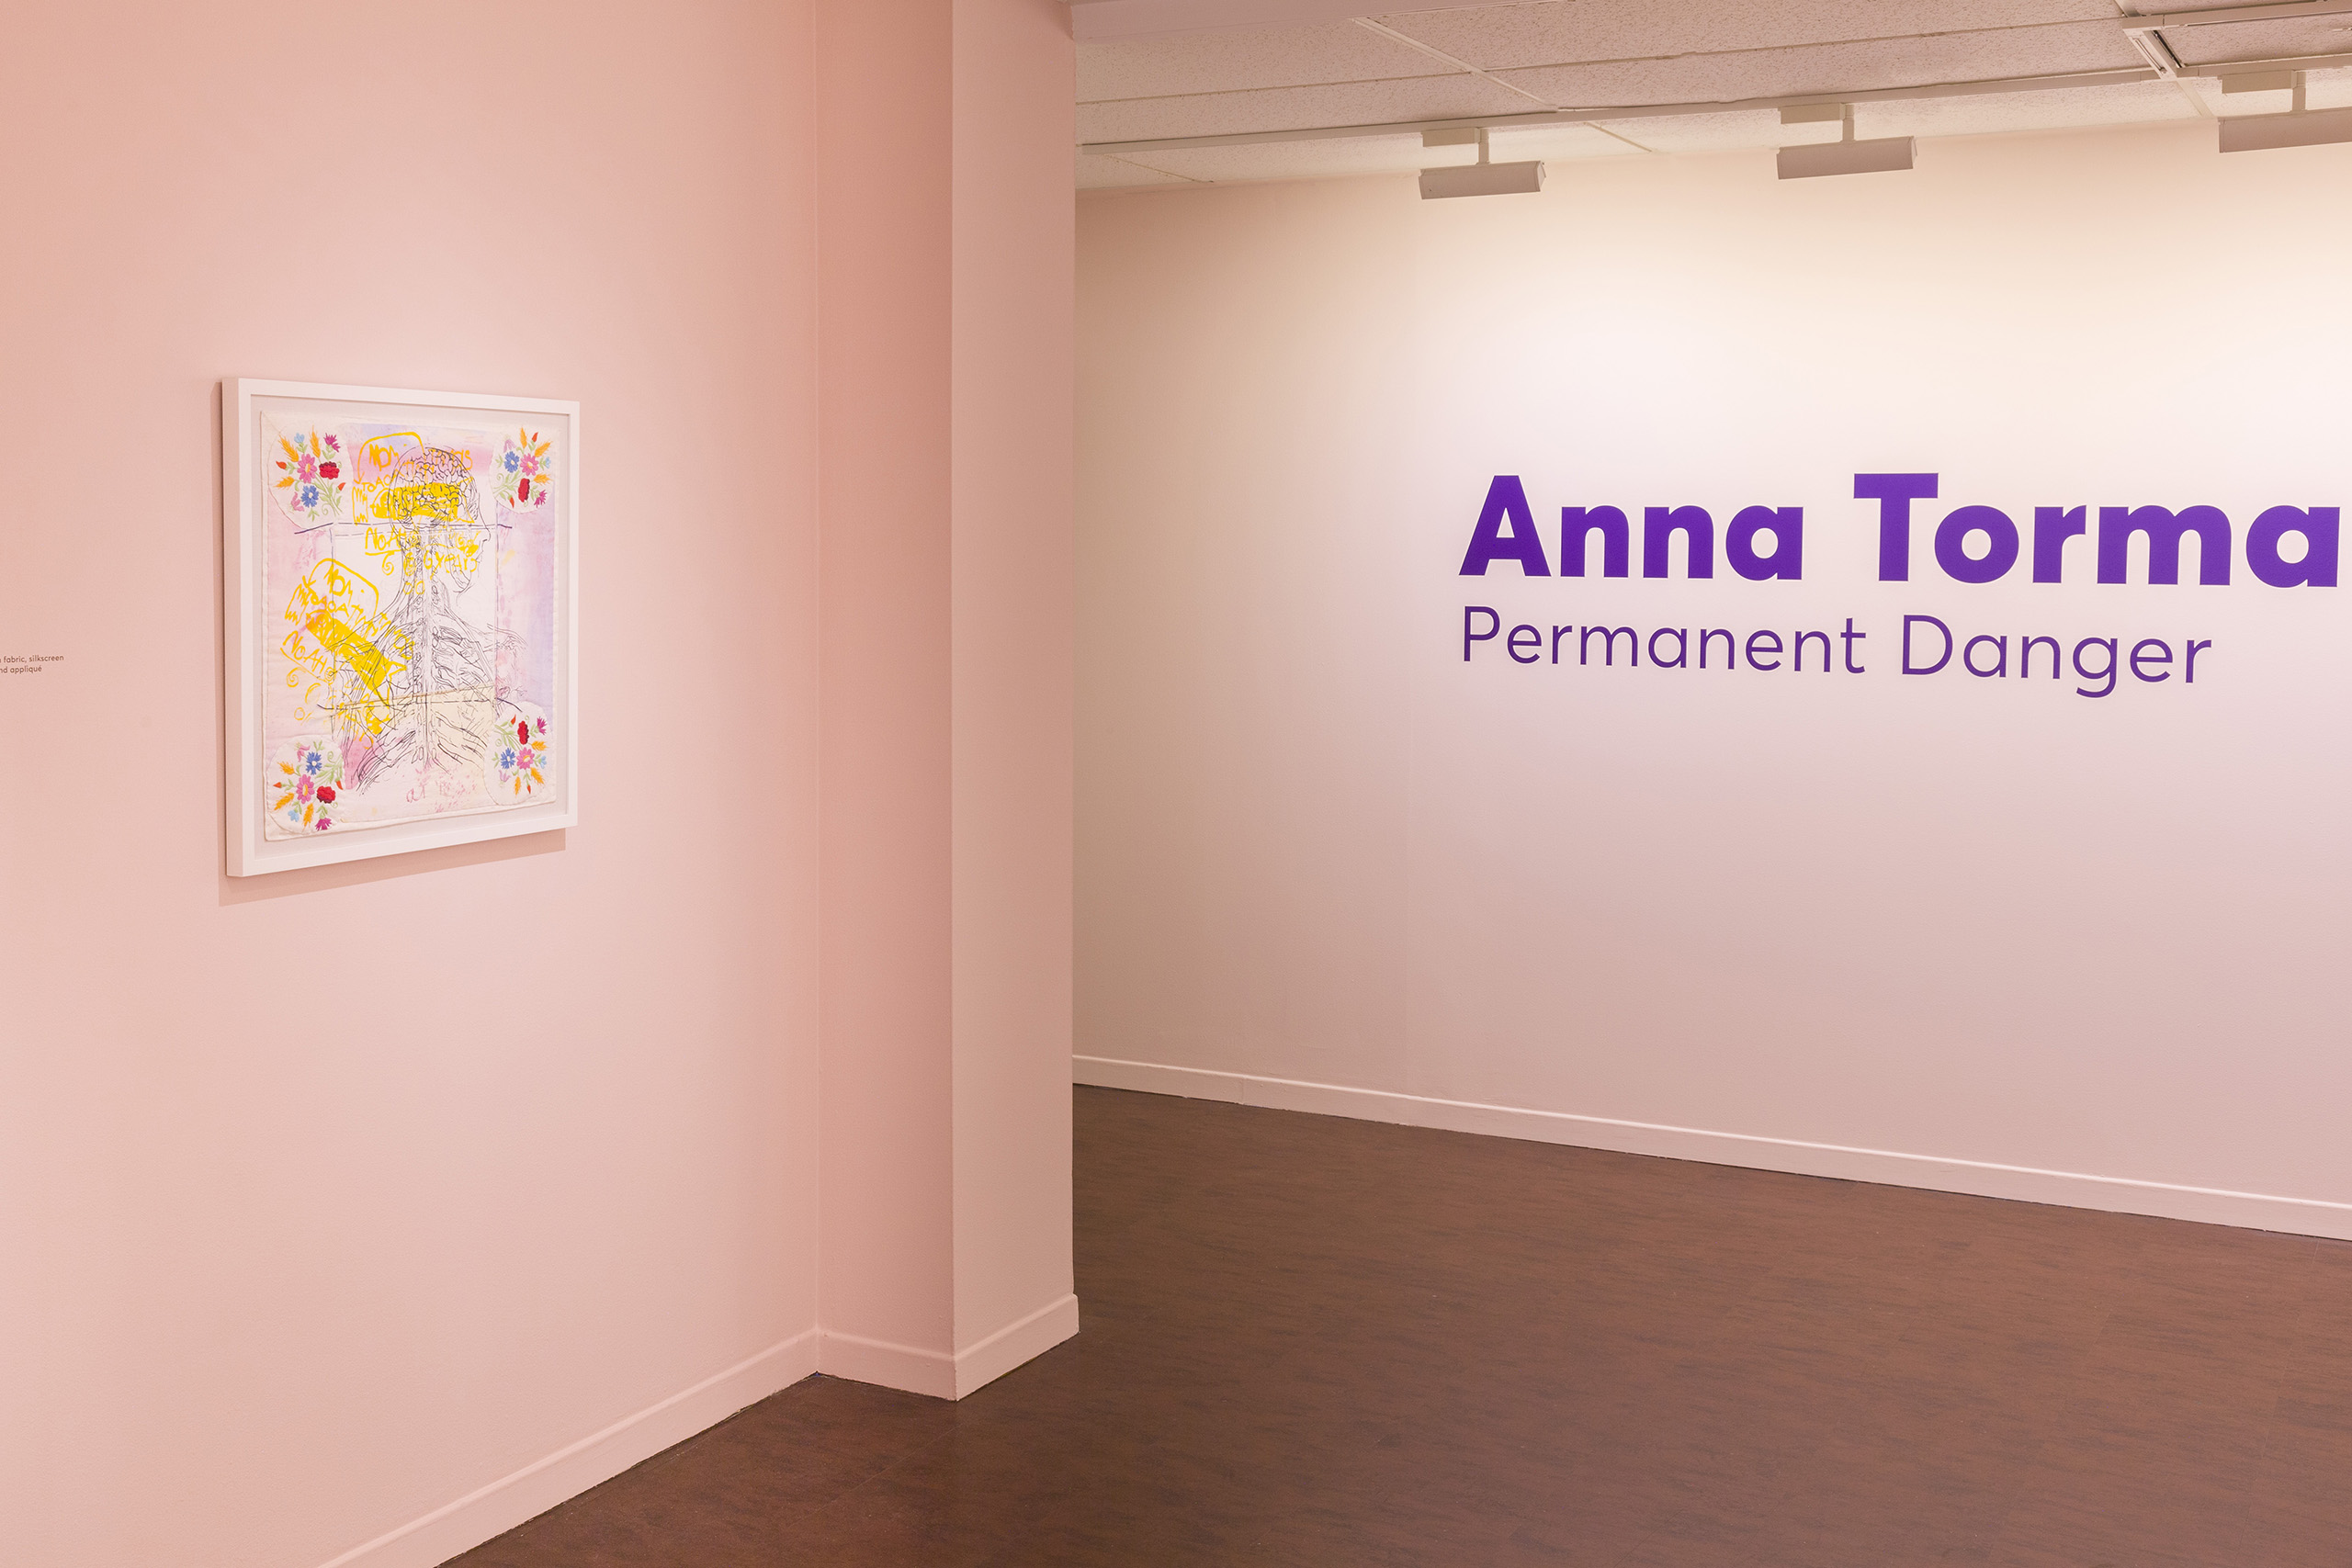 Entrance to the exhibition, pale pink walls with purple text and a framed embroidery